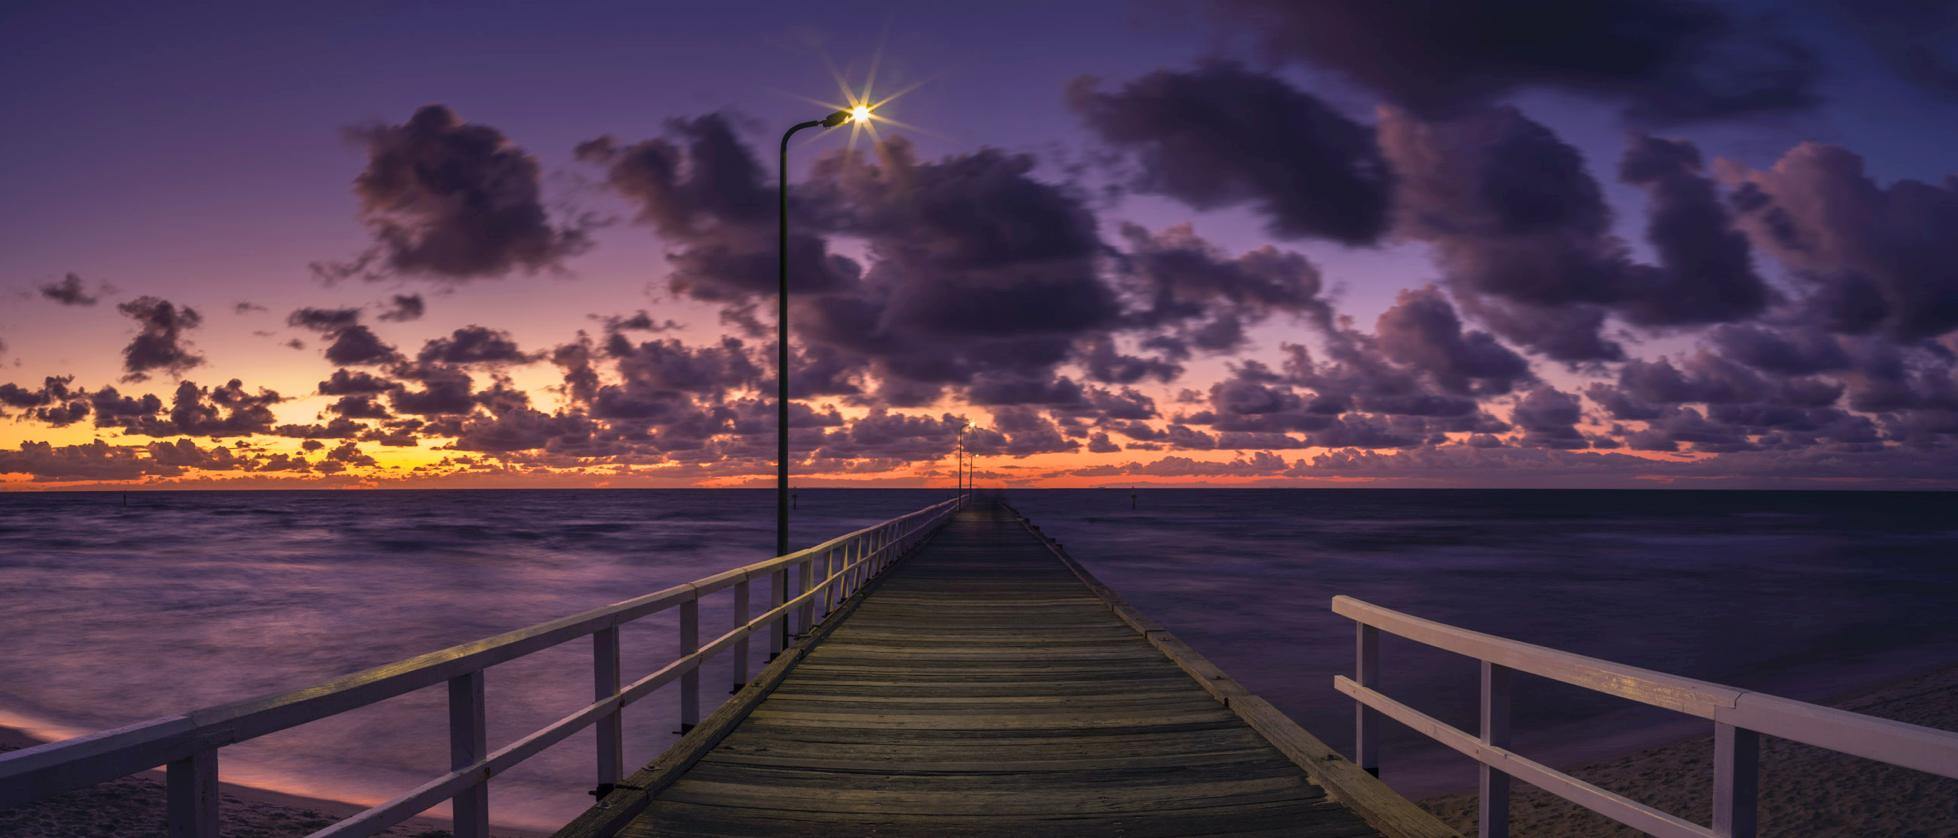 A beautiful wood bridge on the edge of the sea with silent surroundings and some dark thick clouds in the far background, Clouded Dusk, Seaford - Mornington Peninsula VIC